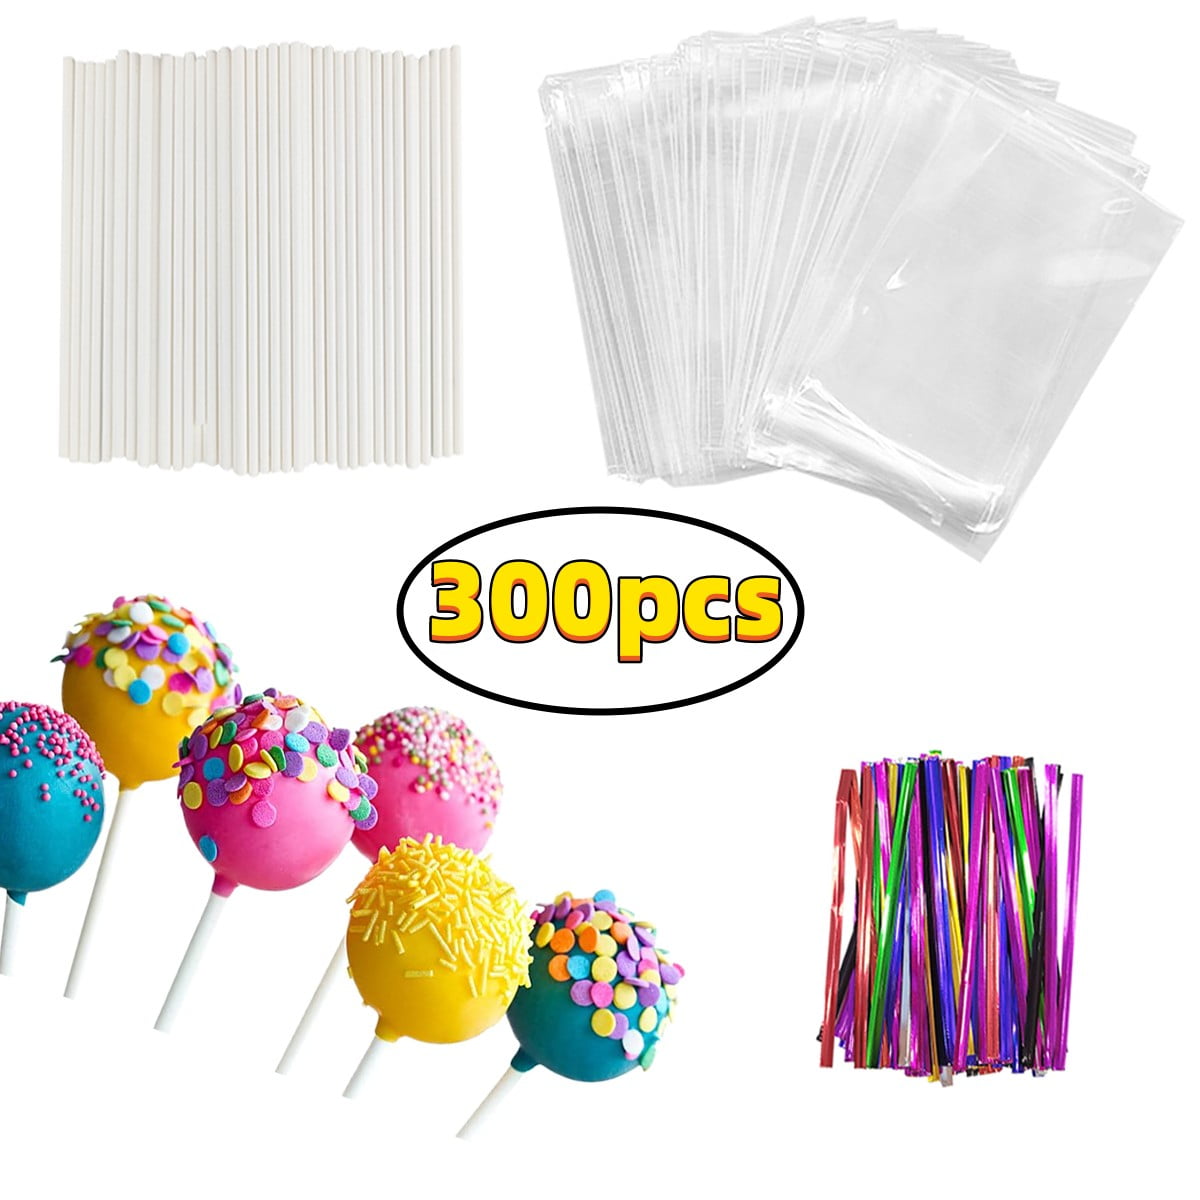 LLMSIX 100PCS Acrylic Lollipop Sticks, 6inch Cake Pop Sticks Transparent  Cupcake Toppers Stick for Cake Pops, Candy Making Supplies for Candy  Dessert